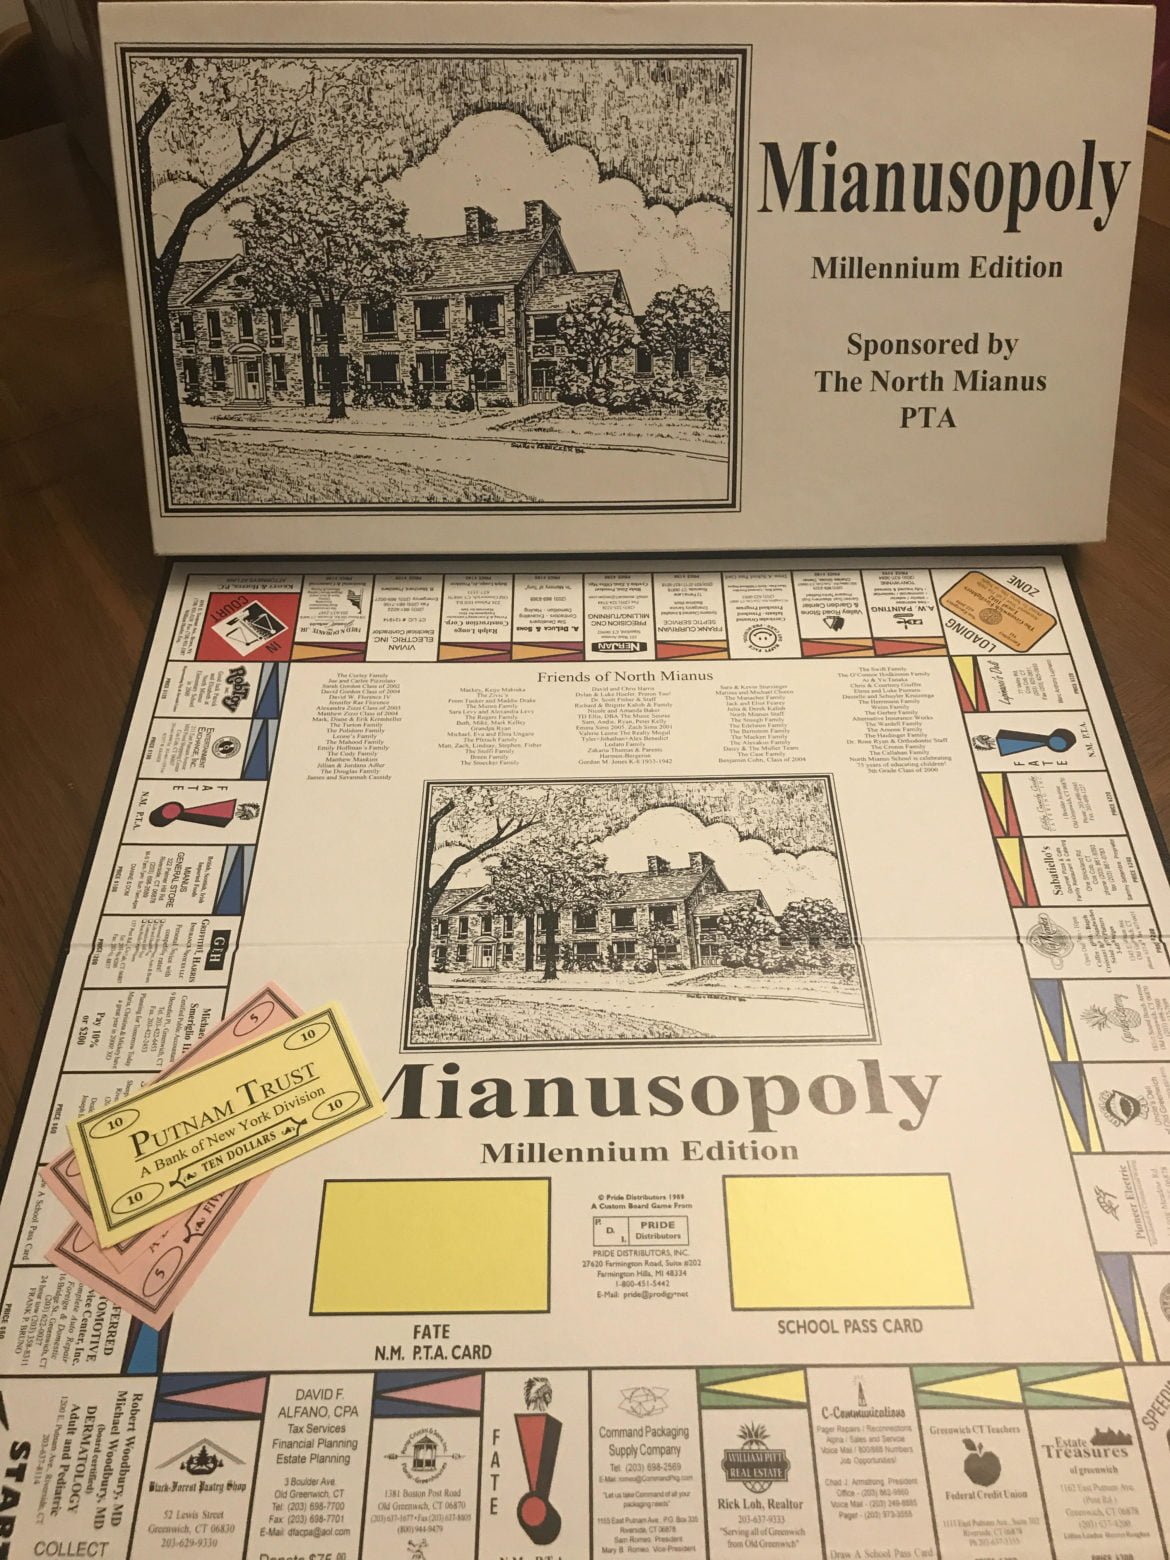 Jessica Reid said growing up she had a game called Mianus-Opoly, which came to mind as the idea for a map featuring local independent businesses.